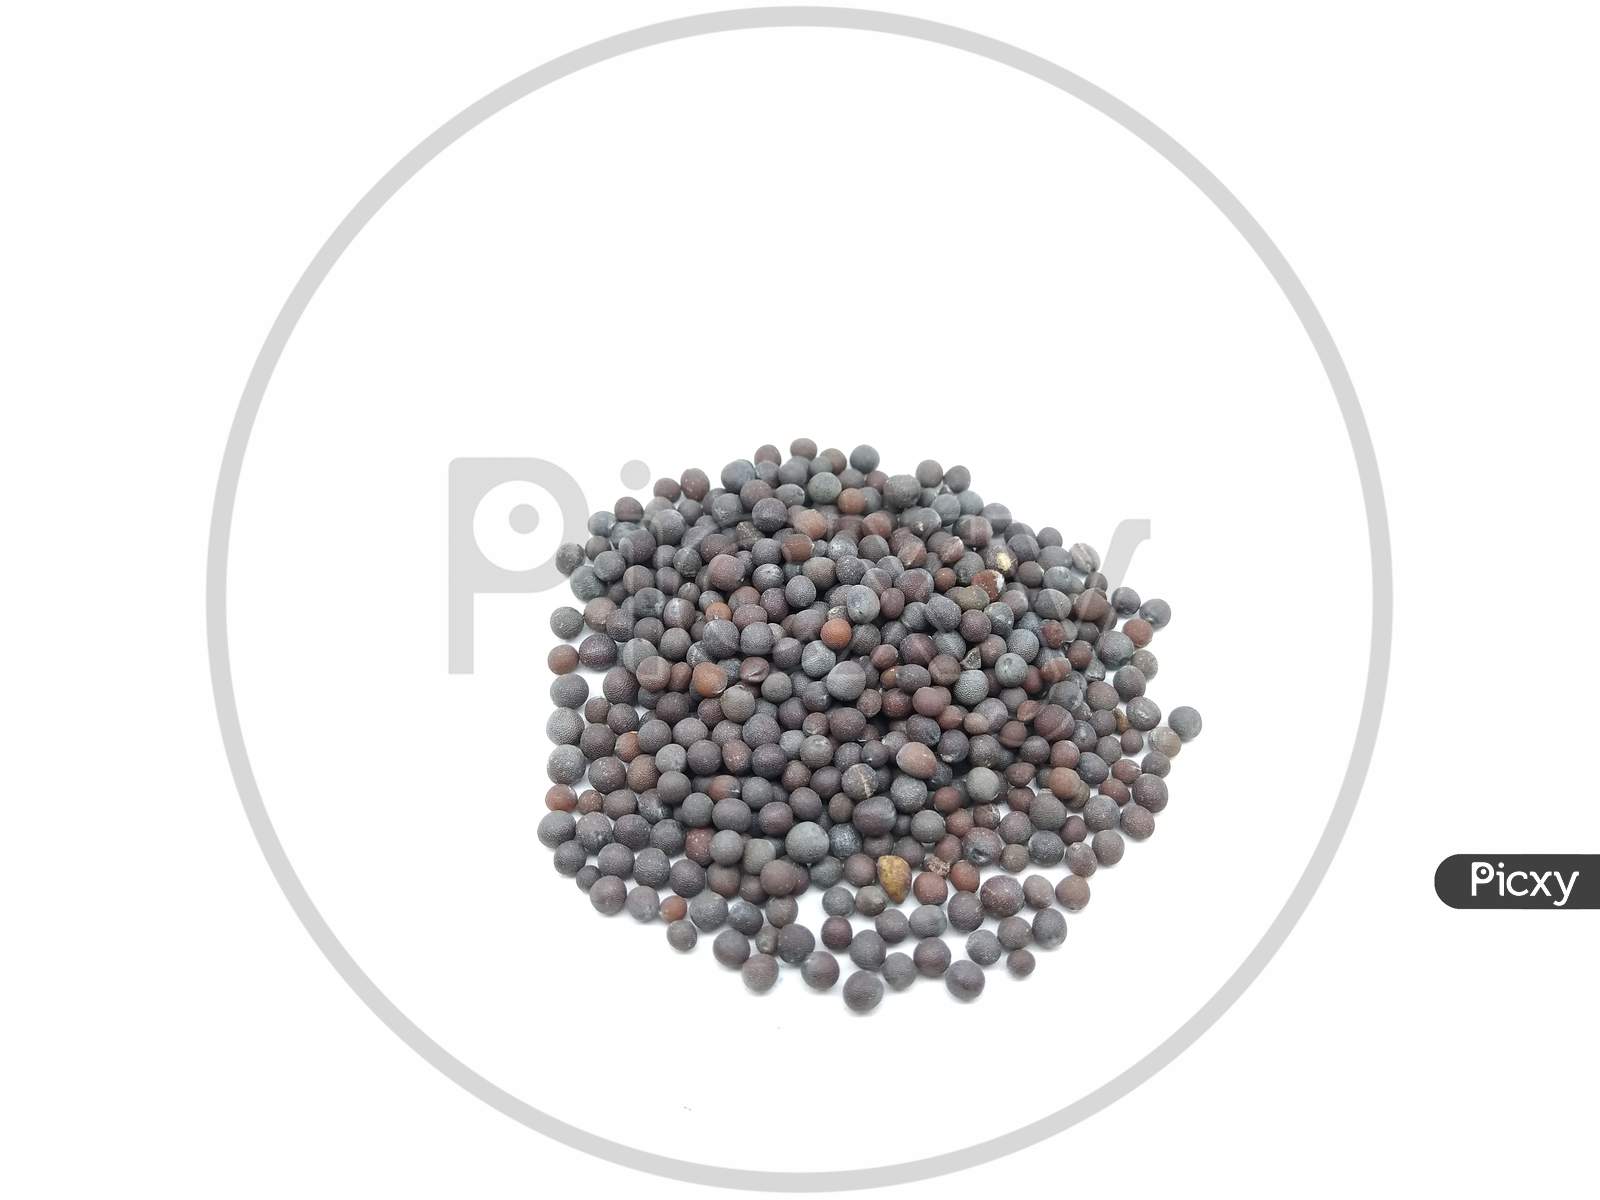 Mustard Seeds Over an Isolated White Background